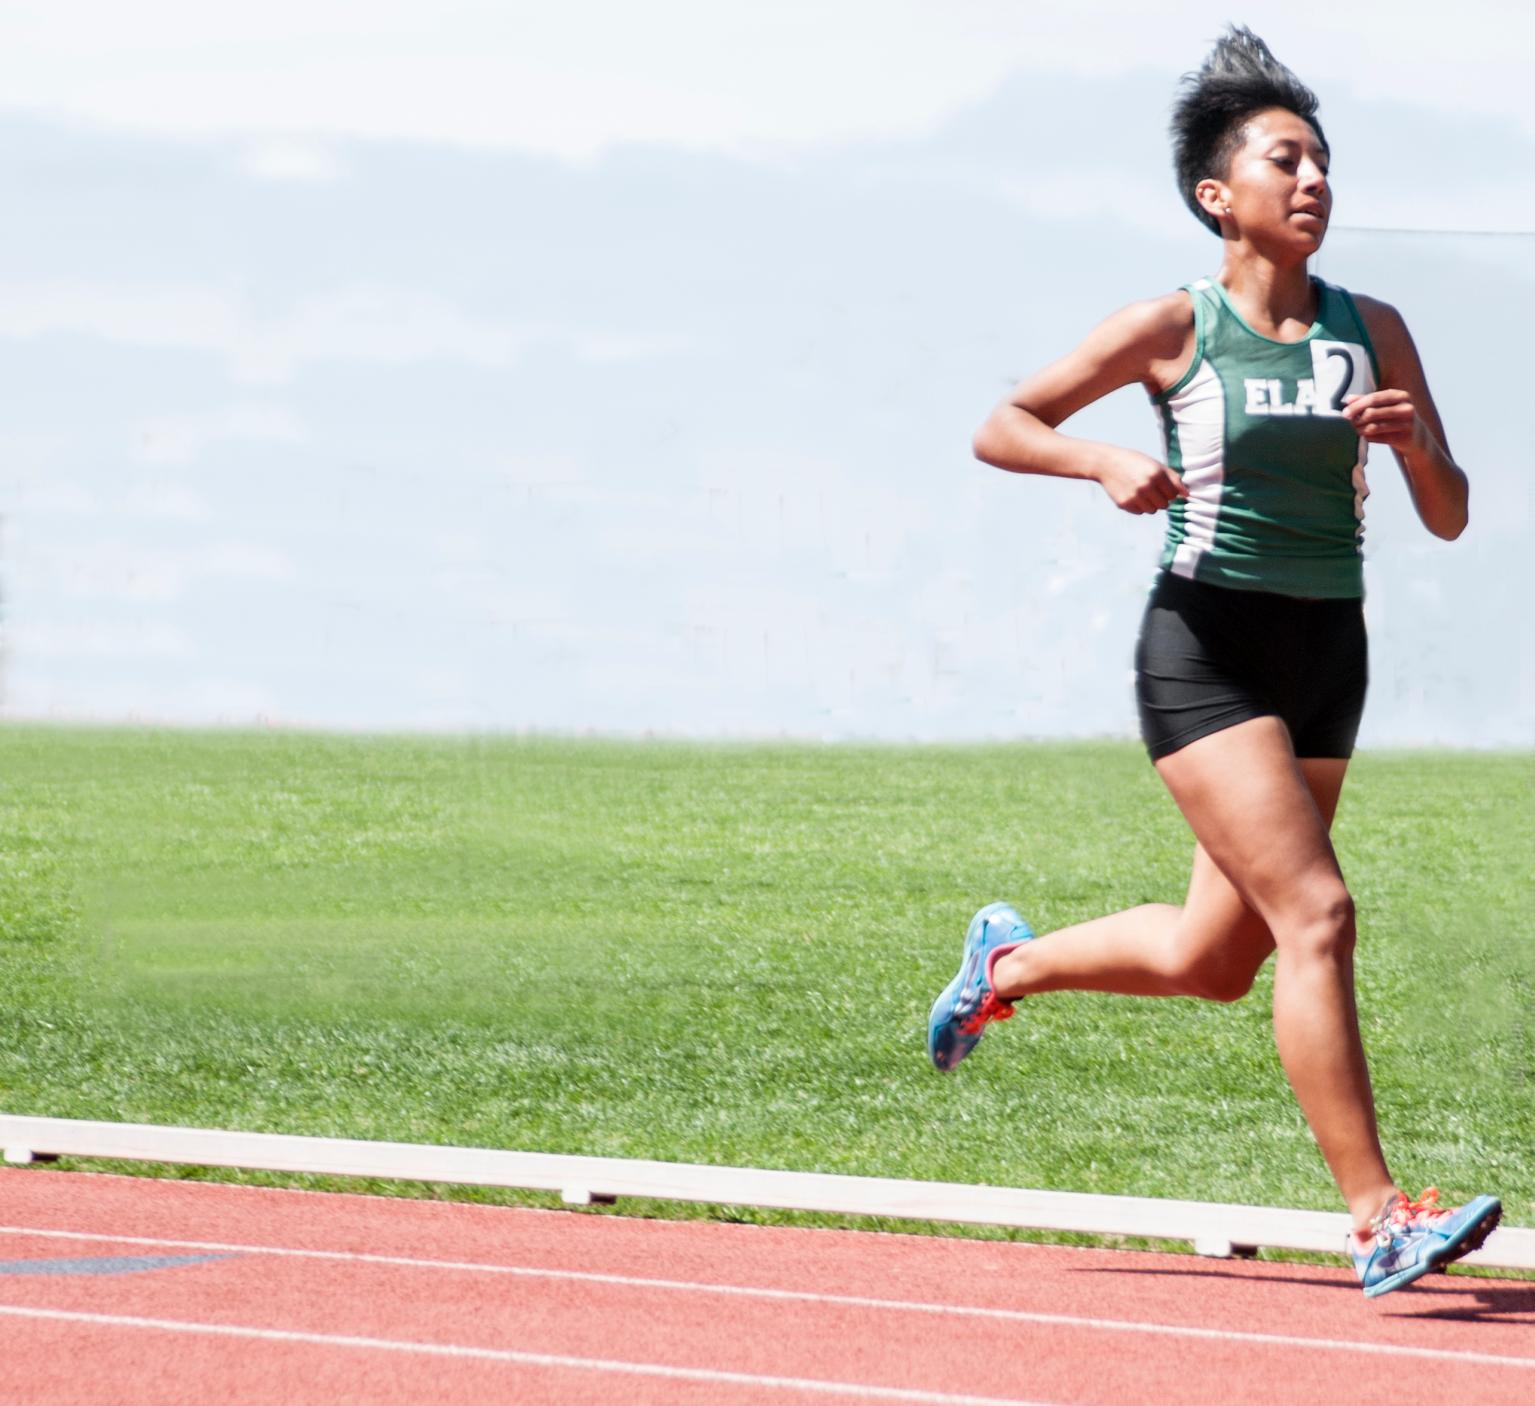 ELAC women’s track and field shines in the sun